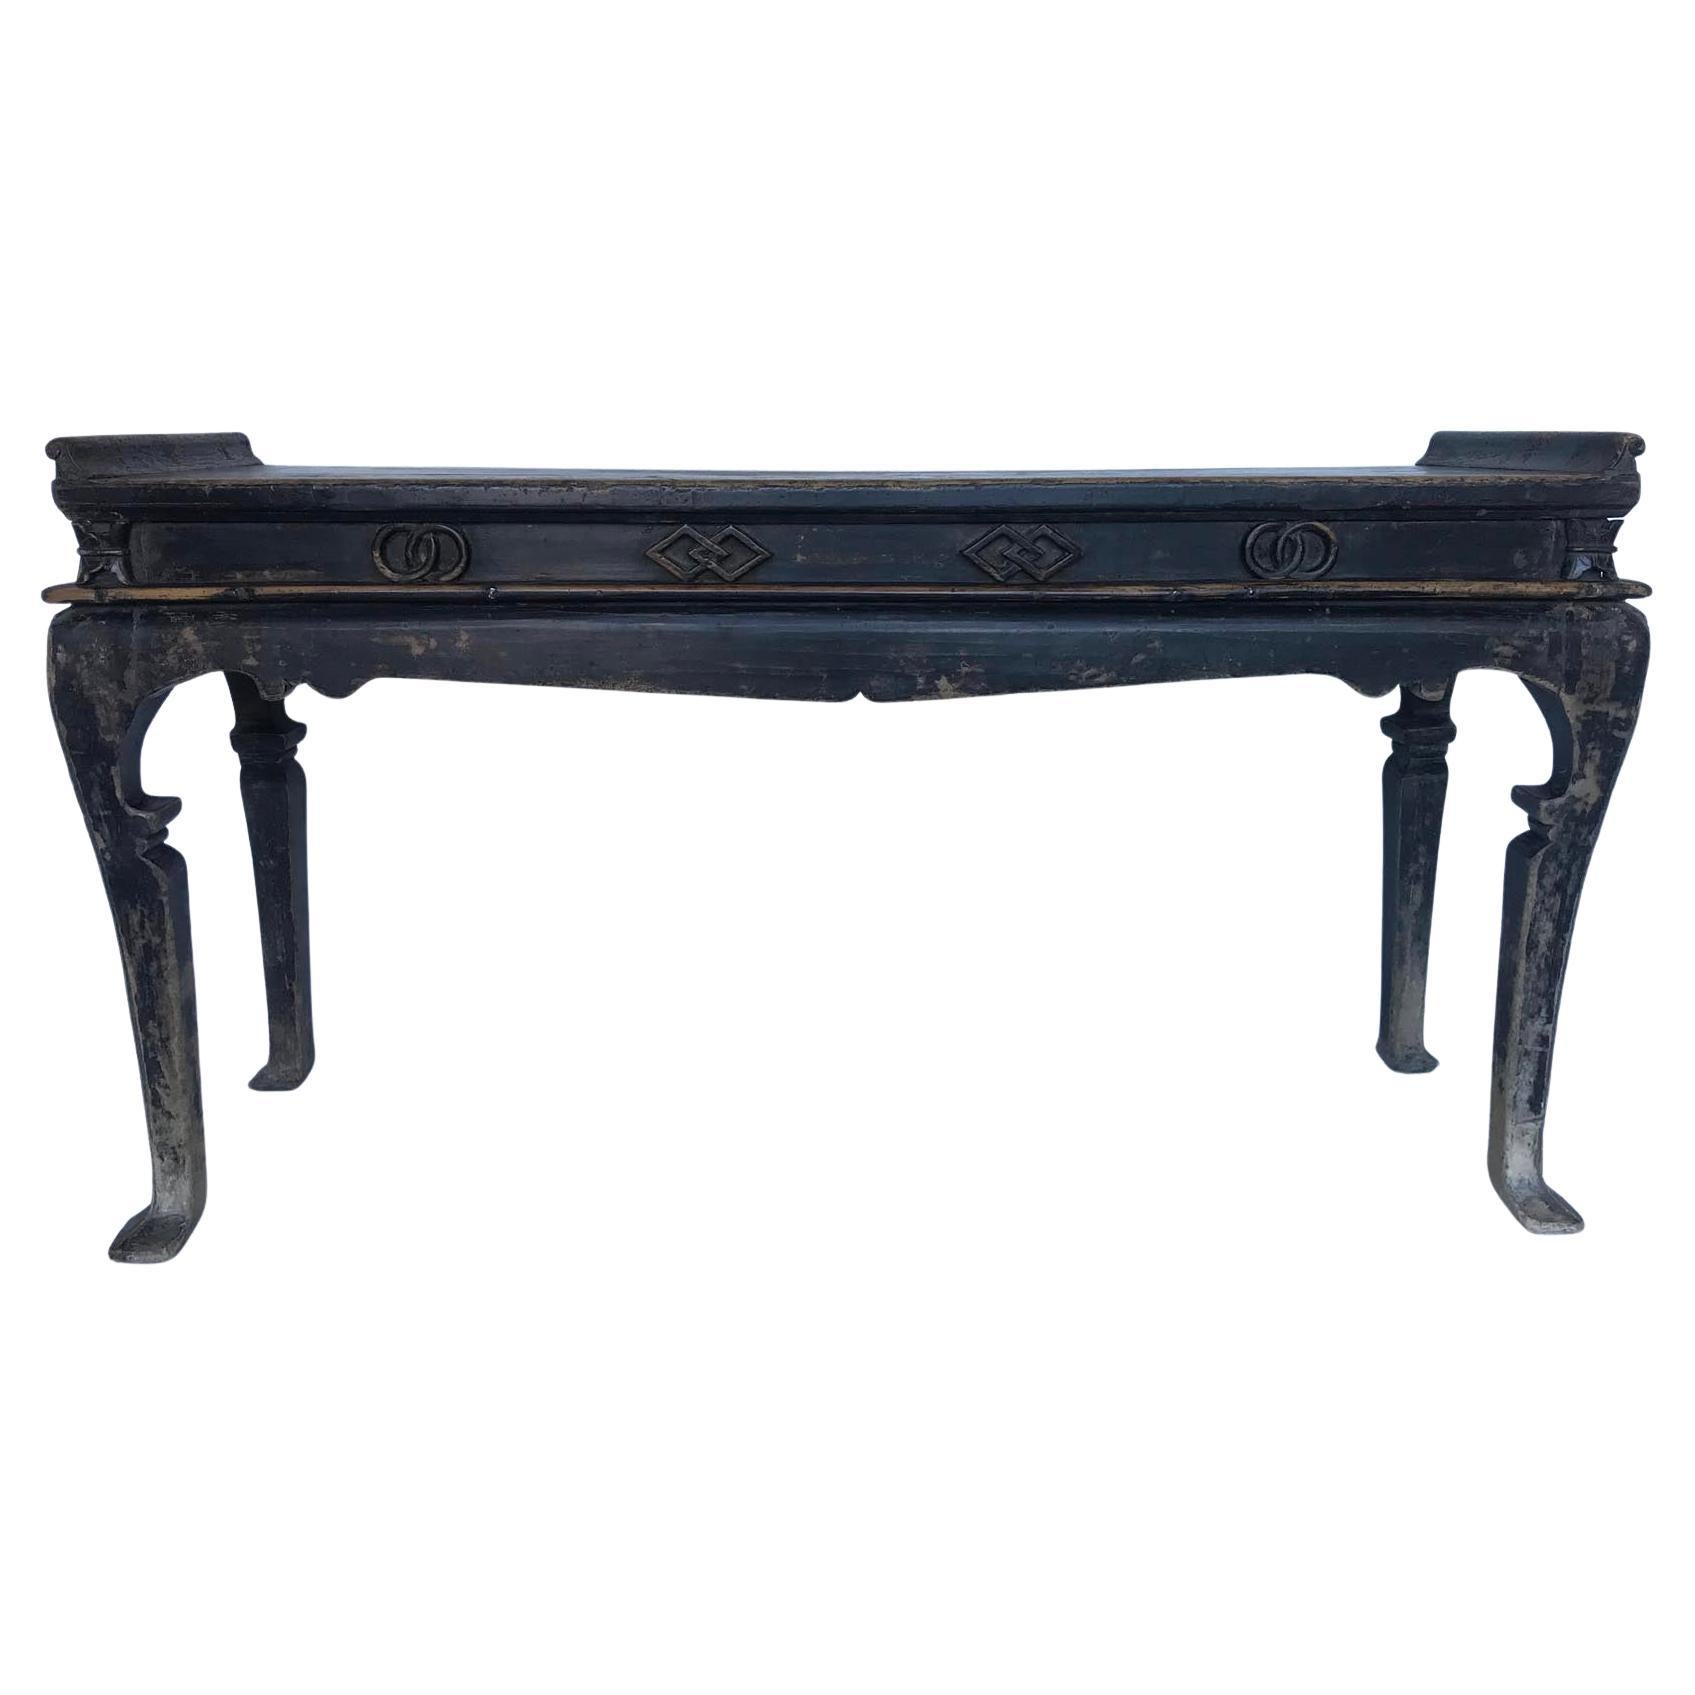 Early 19th Century Chinese Altar Table